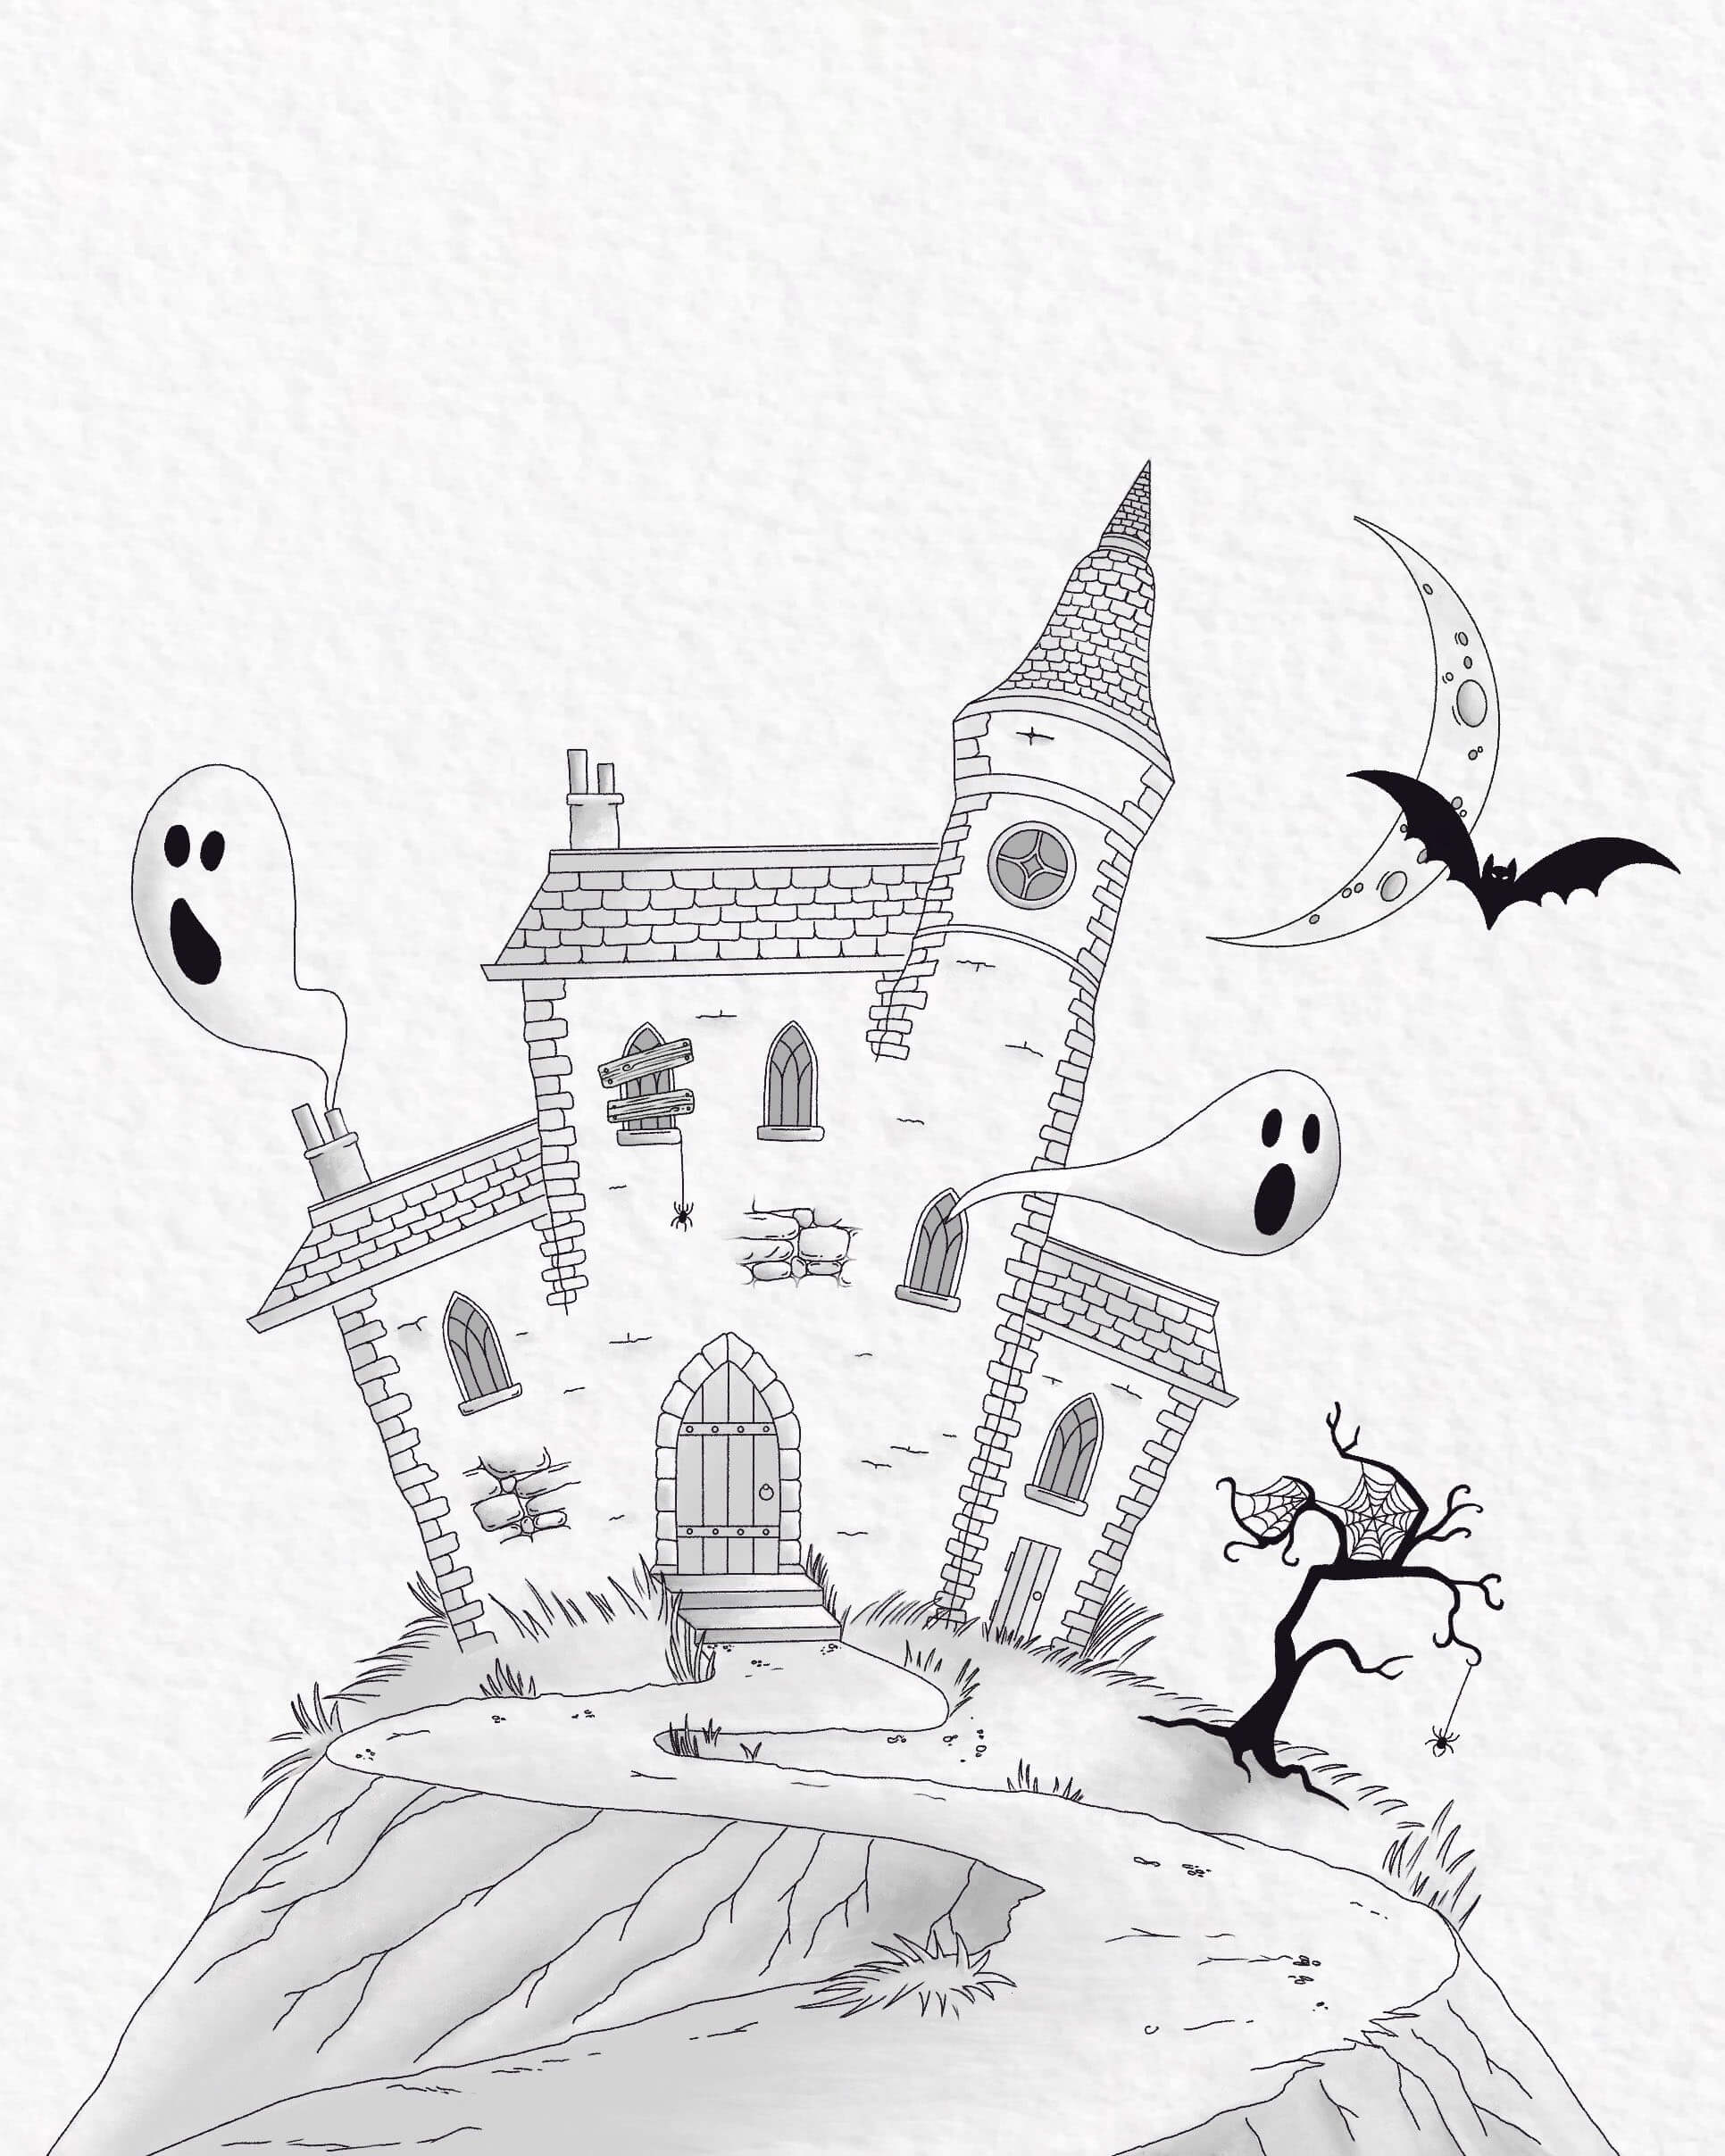 Haunted house sketch drawn in doodle style Vector Image